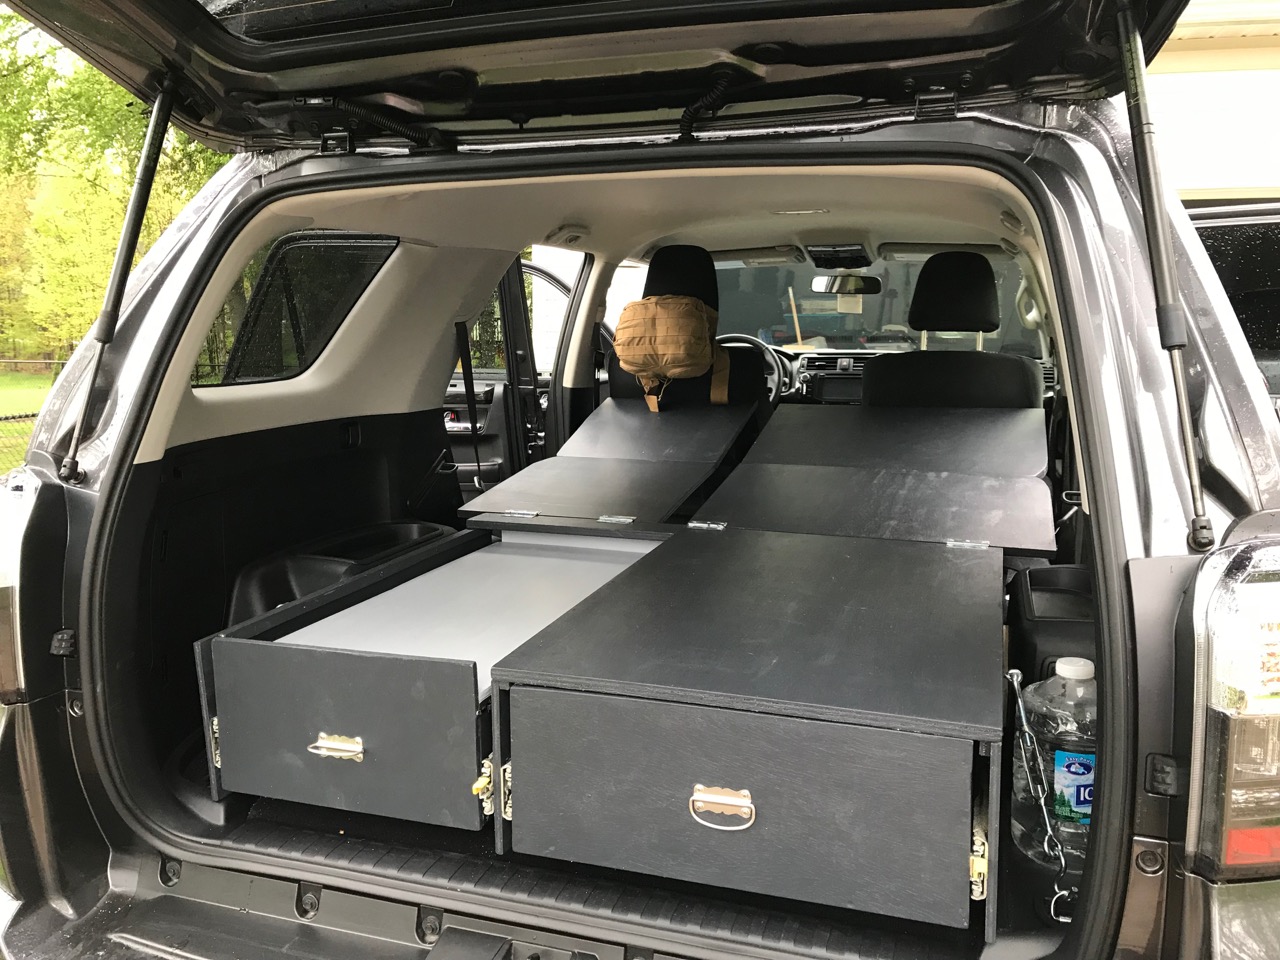 4Runner drawer system and sleeping platform, extended over the second row of seats